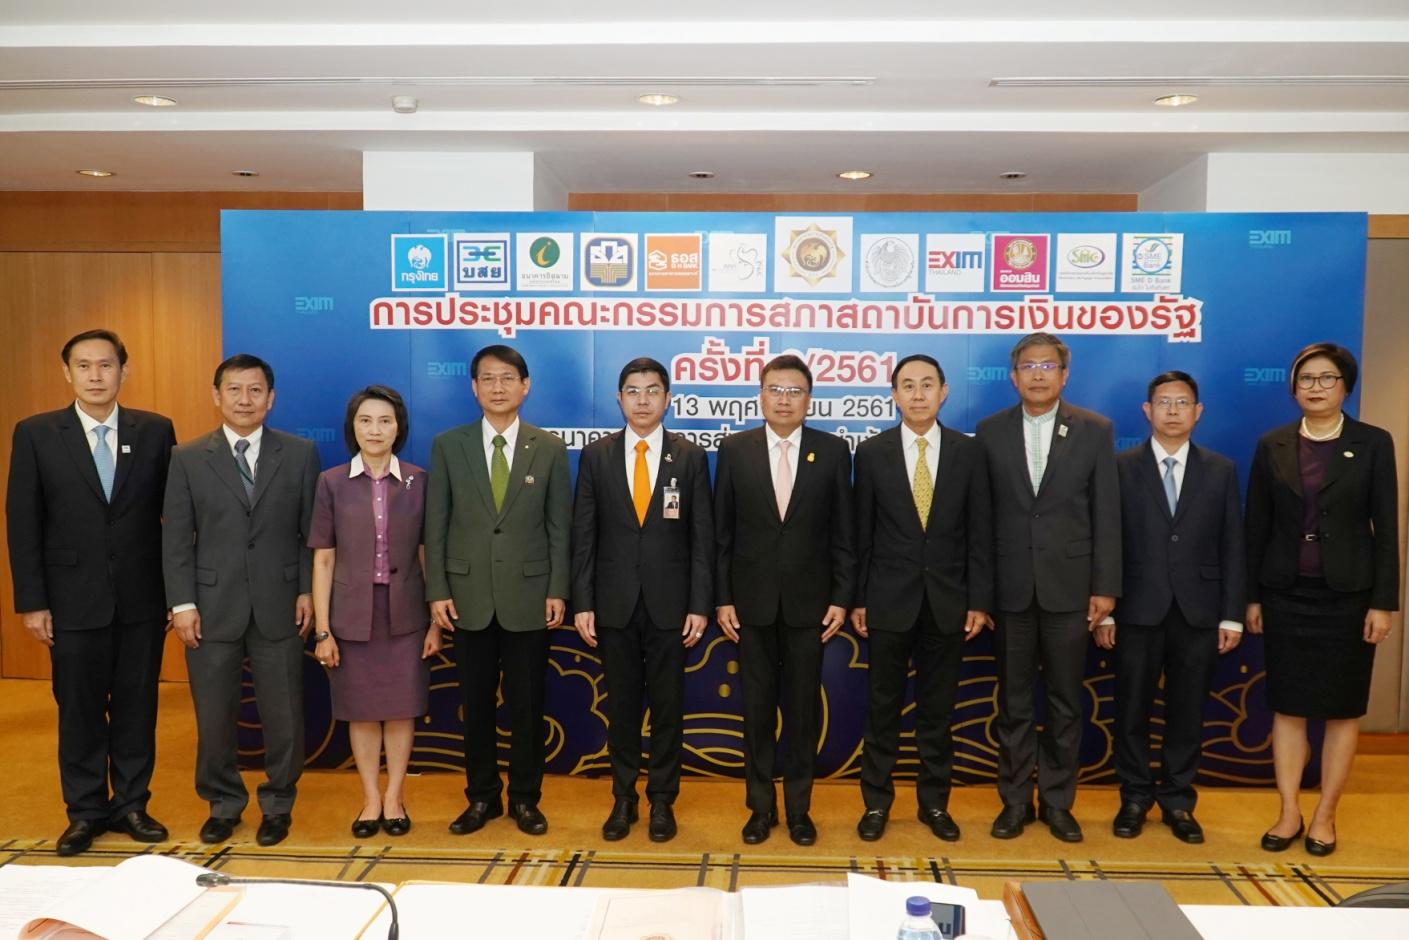 EXIM Thailand Hosts 6th Council of Specialized Financial Institutions Meeting in 2018